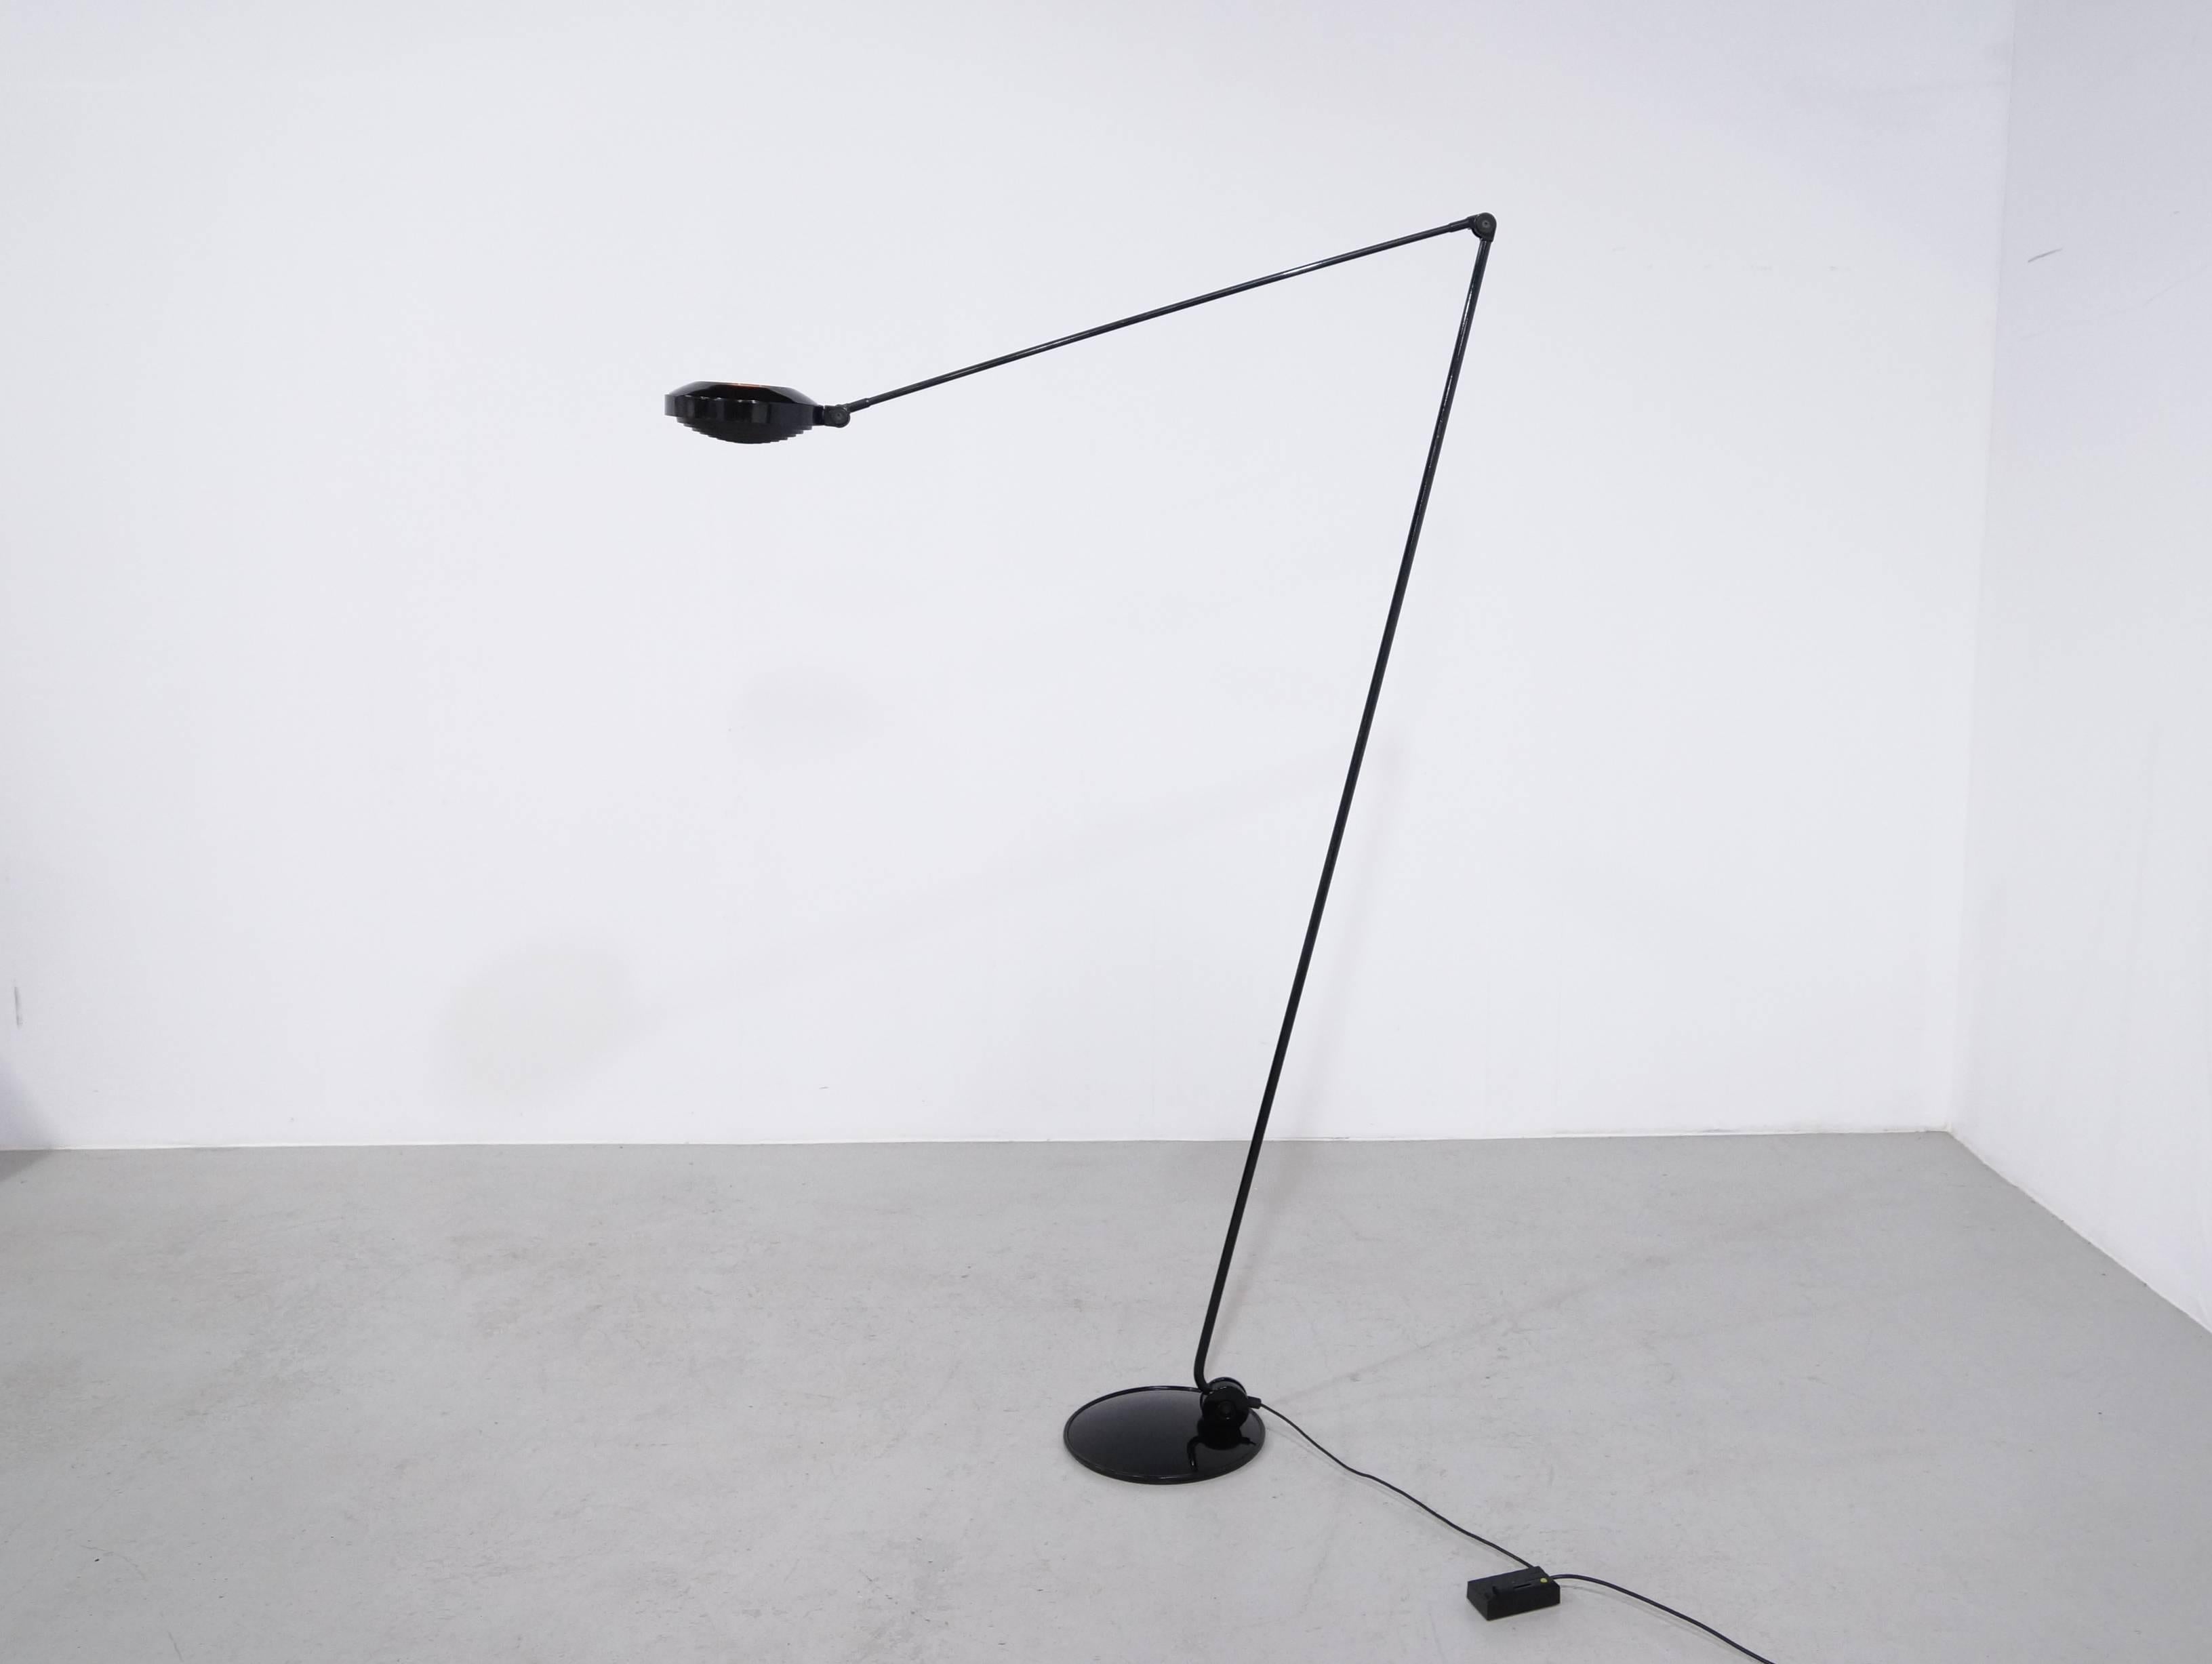 A first edition (1978 ) of the Minimalistic halogen floor lamp Elle 2 by Tommaso Cimini for Lumina. This floor lamp can be used for direct or diffused Lightning. Jointed long arms with an adjustable reflector and special grid for glare control.
This